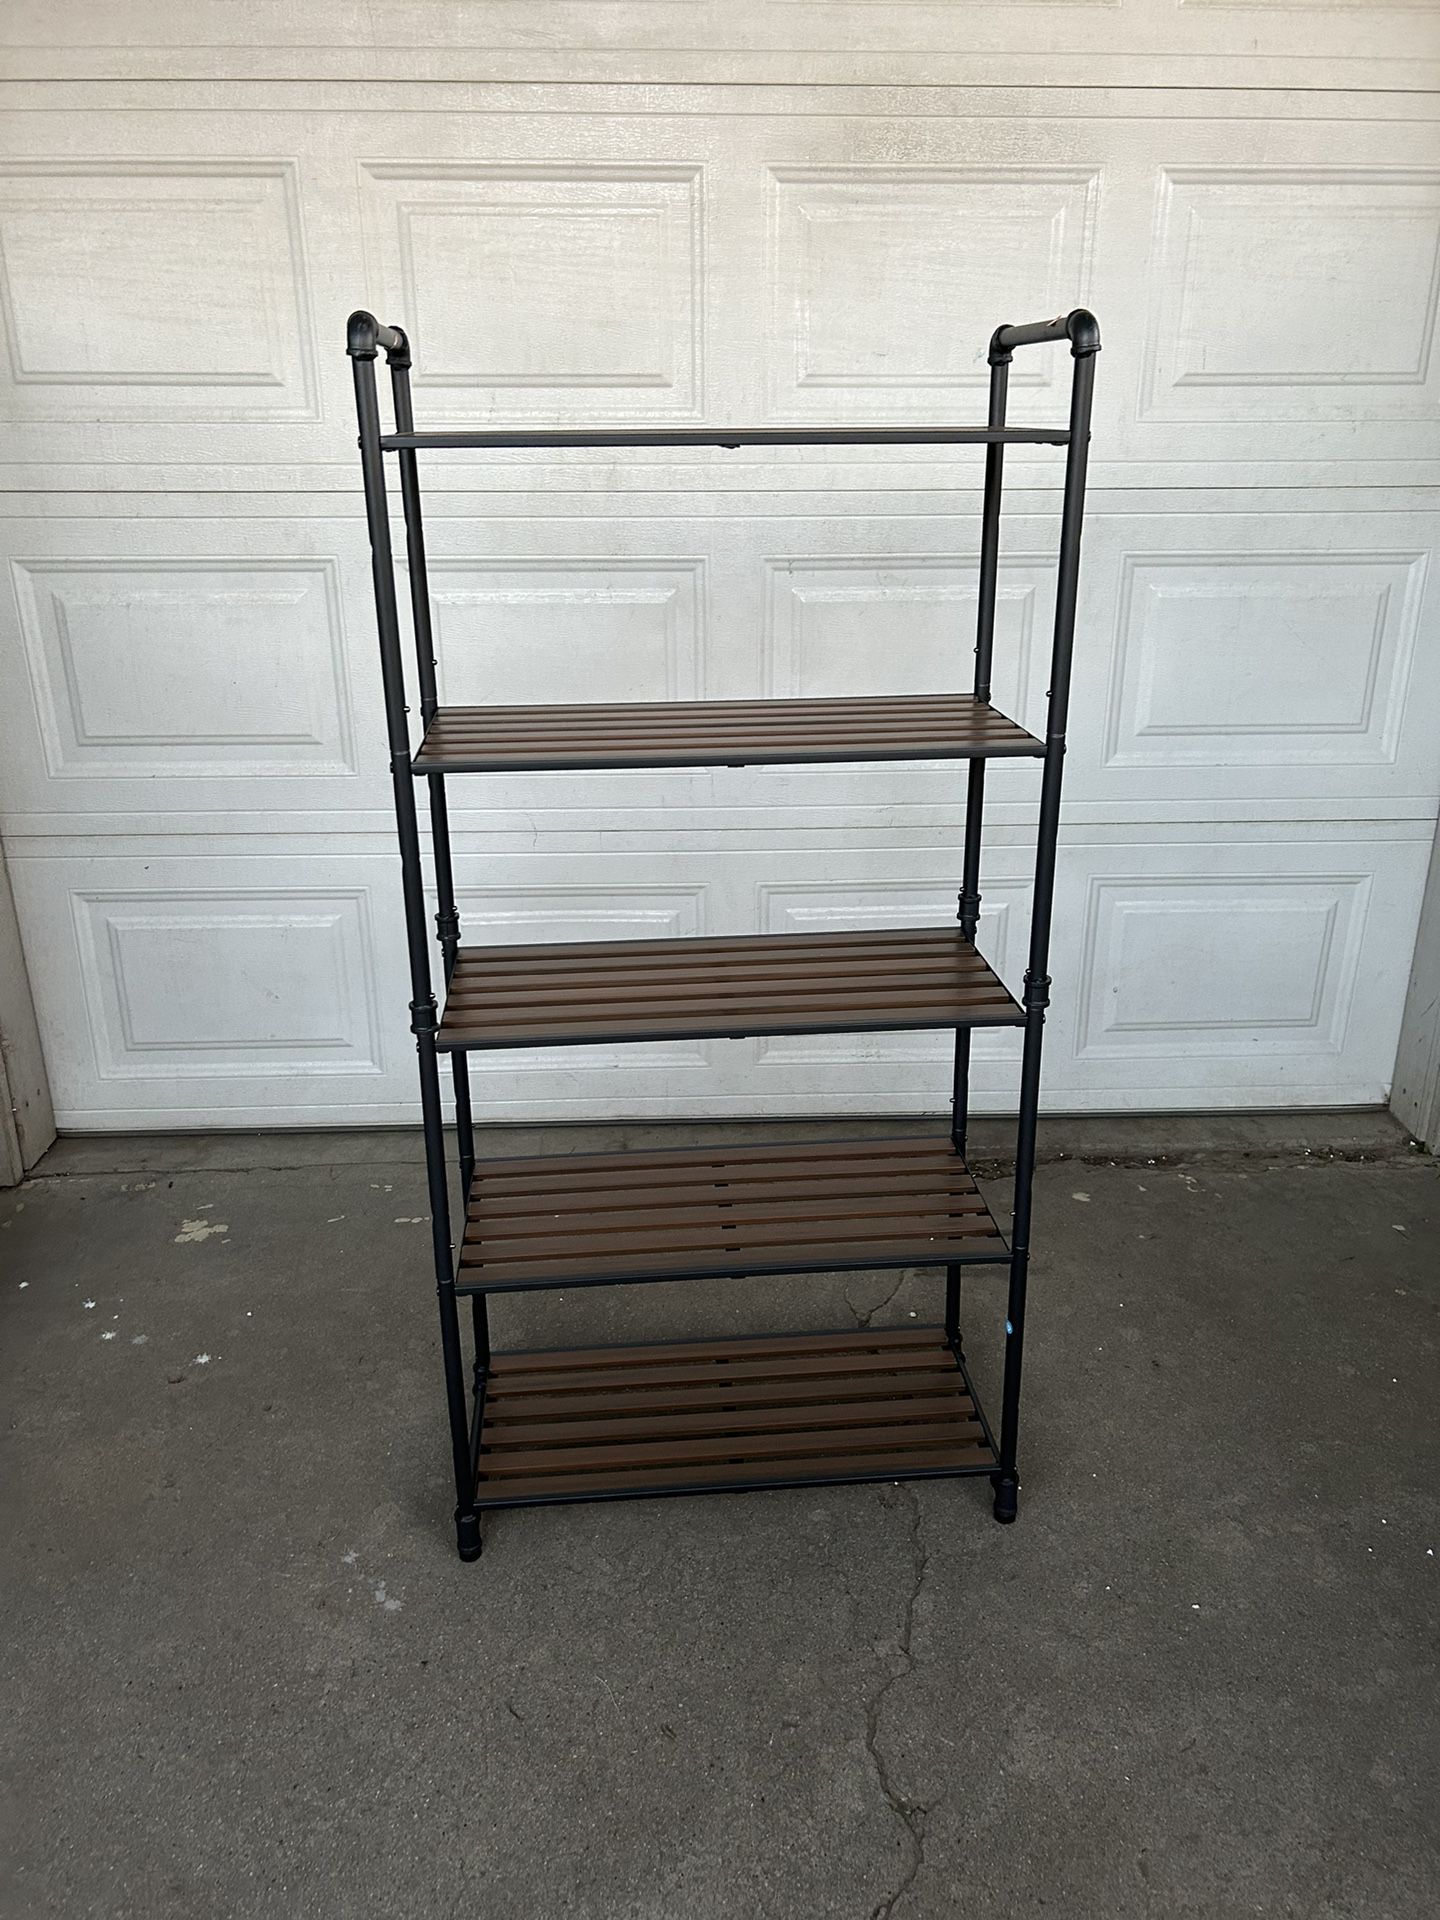 Bathroom Shelves, 5-Tier Storage Rack, Plant Flower Stand, 25.5 x 12.2 x 51 Inches, for Living Room, Balcony, Kitchen, Rustic Brown and Black 